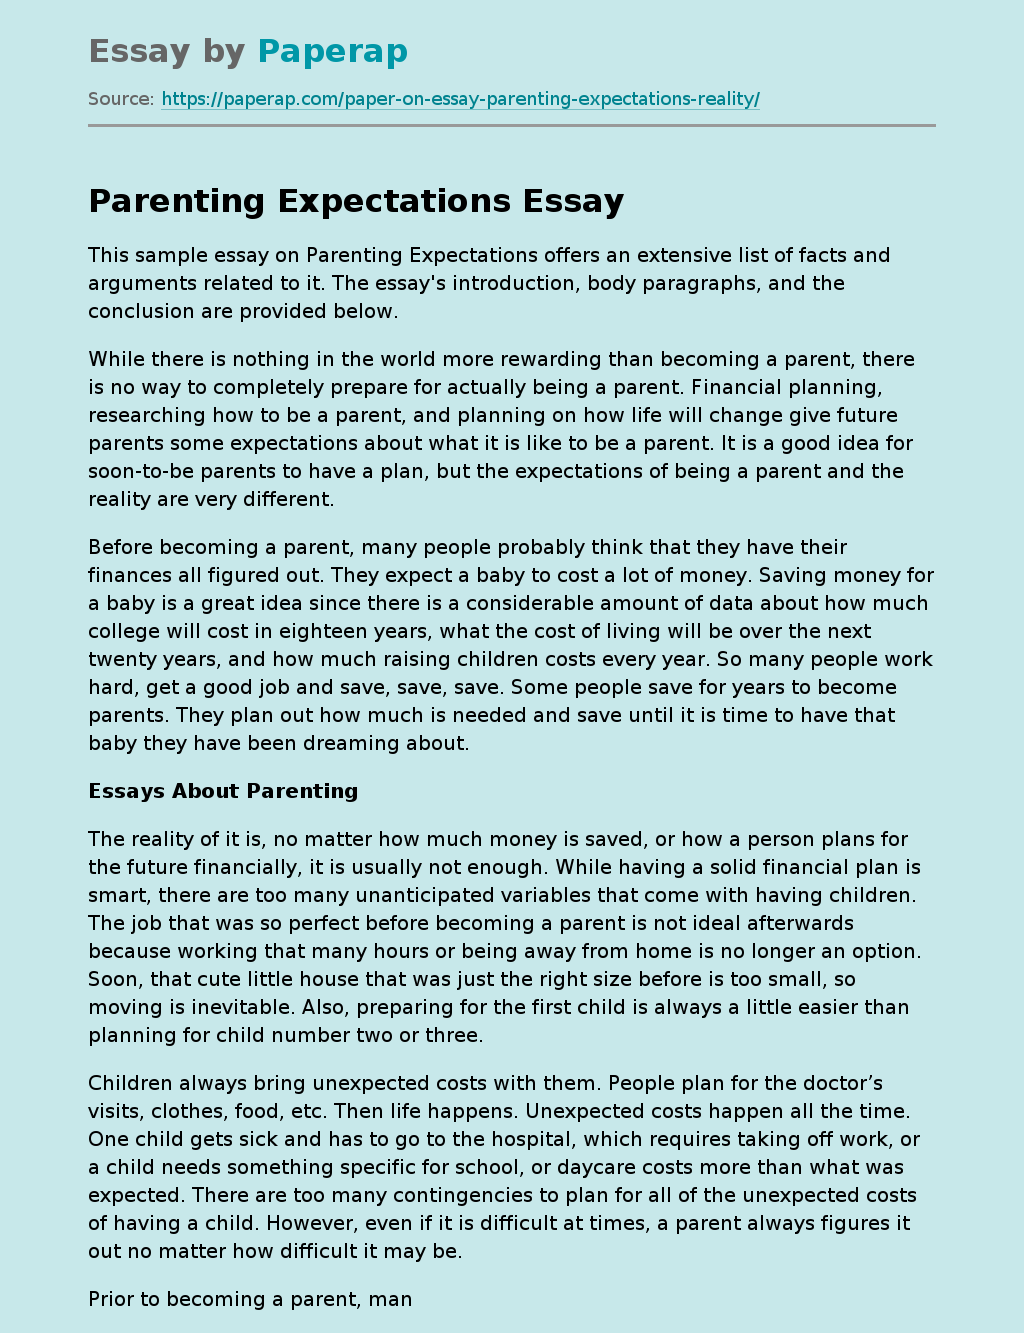 Parenting Expectations